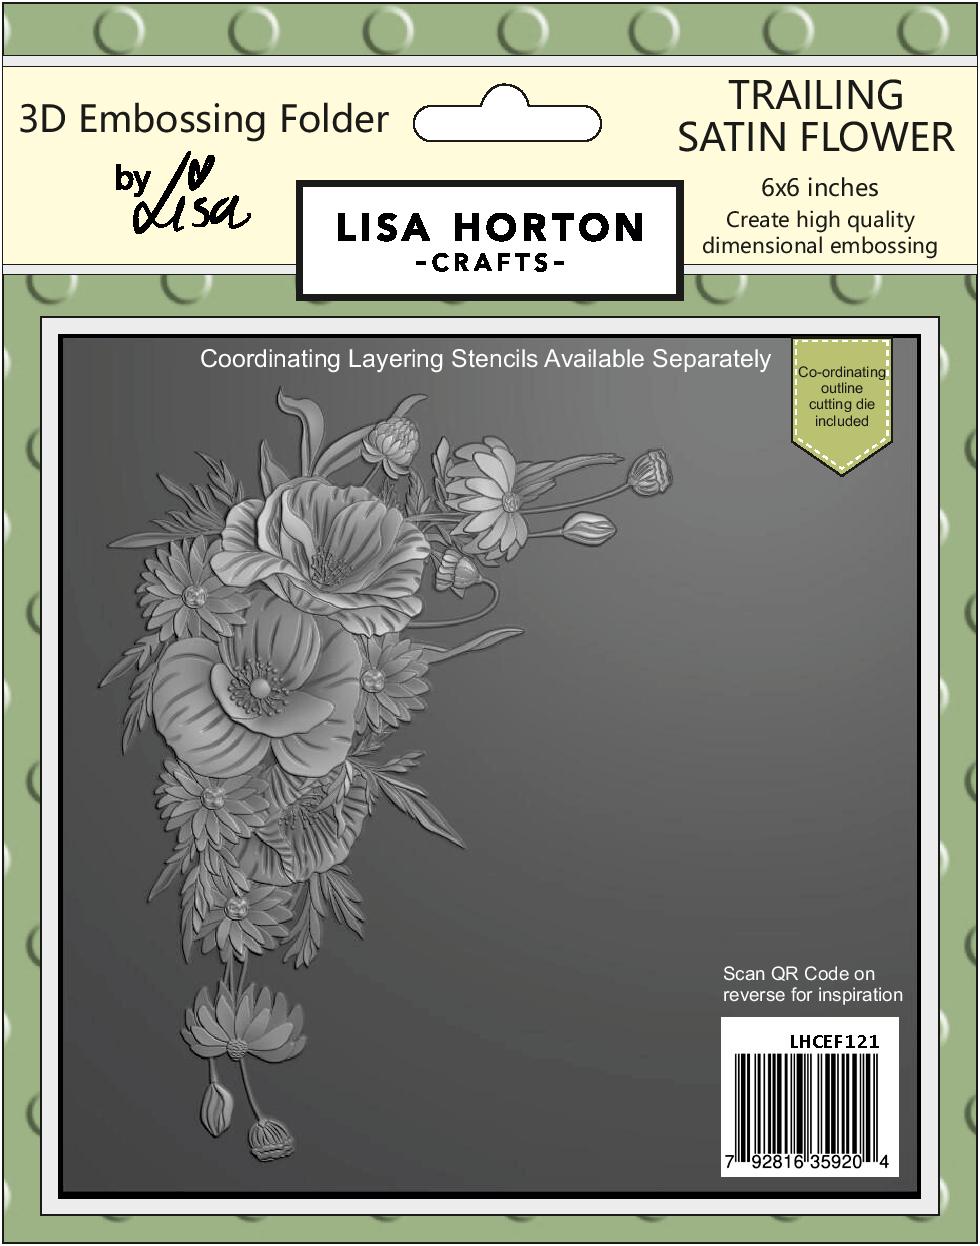 Trailing Satin Flower 6x6 3D Embossing Folder  with Die